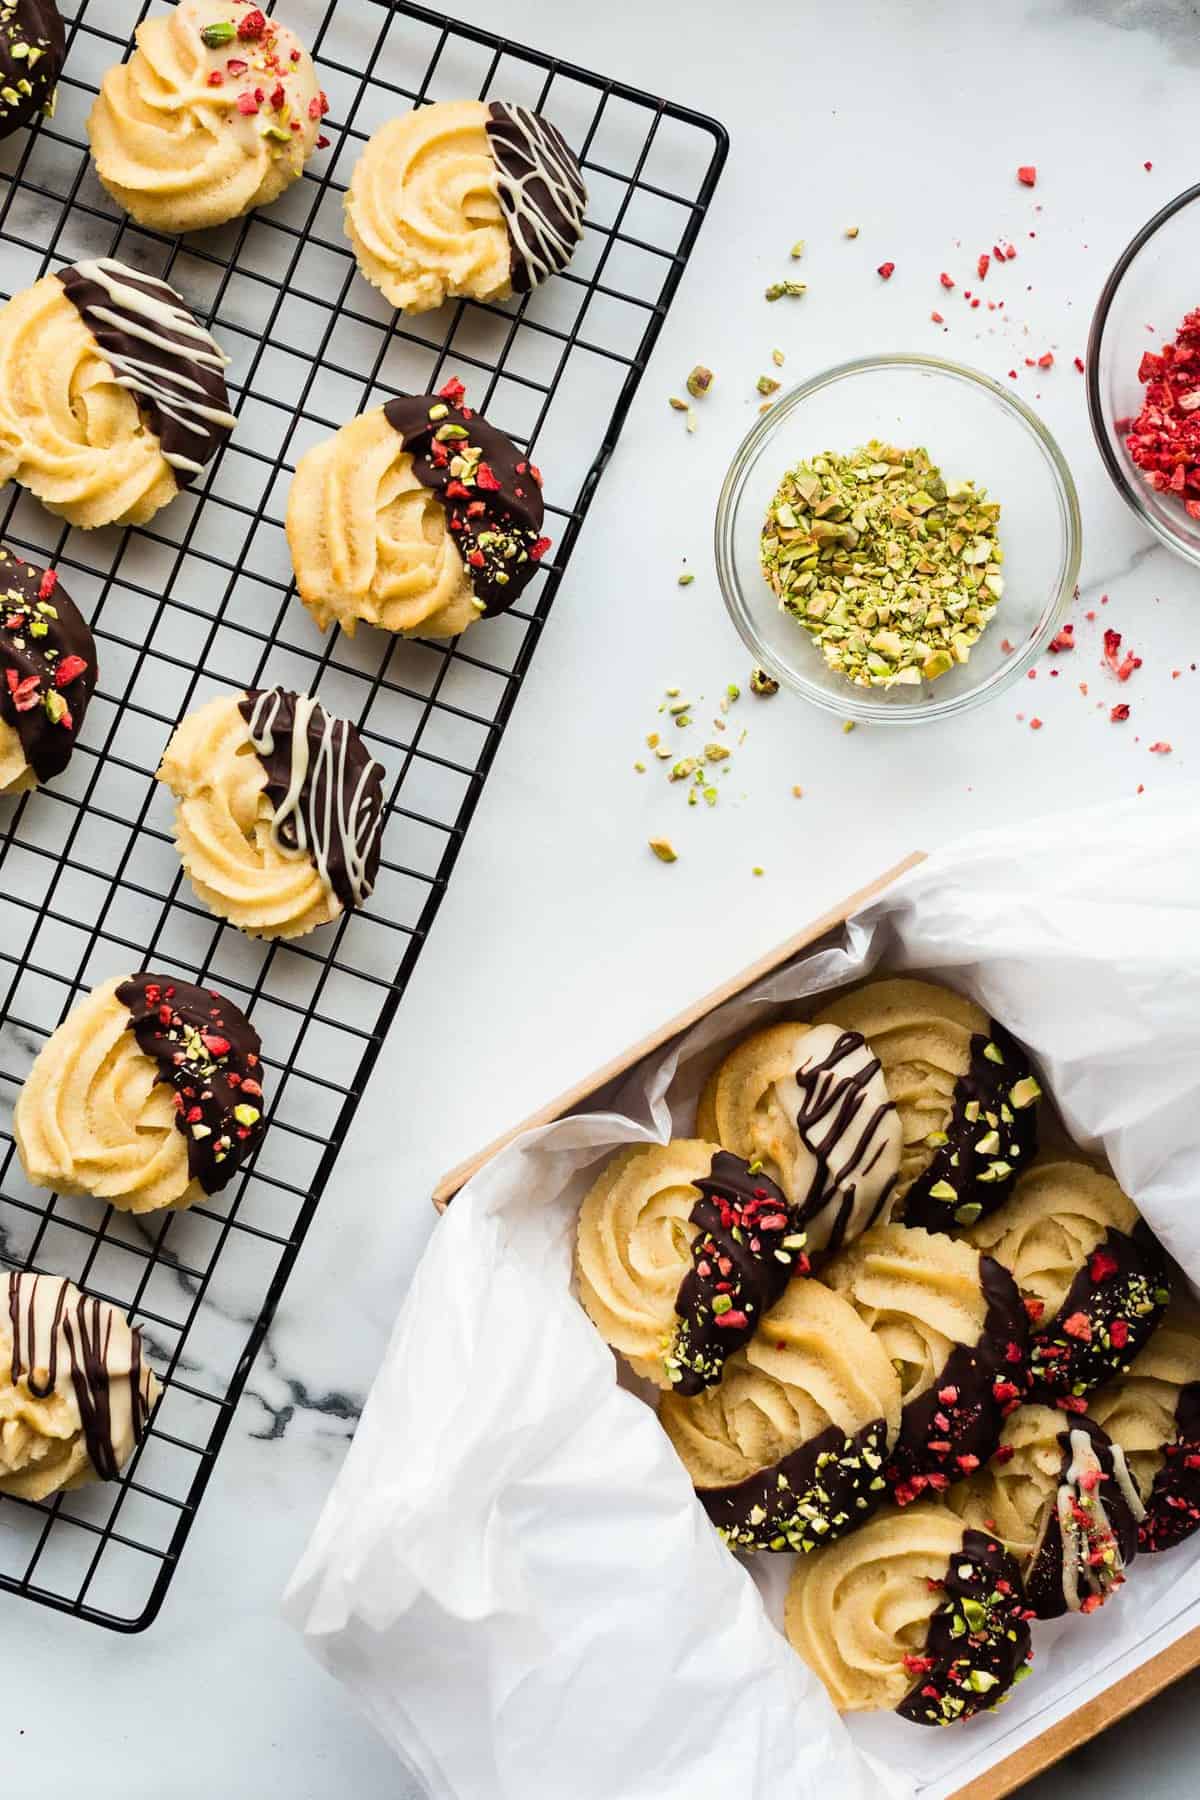 Decorating vegan butter cookies with dark chocolate, crushed pistachios, and freeze-dried straberries/